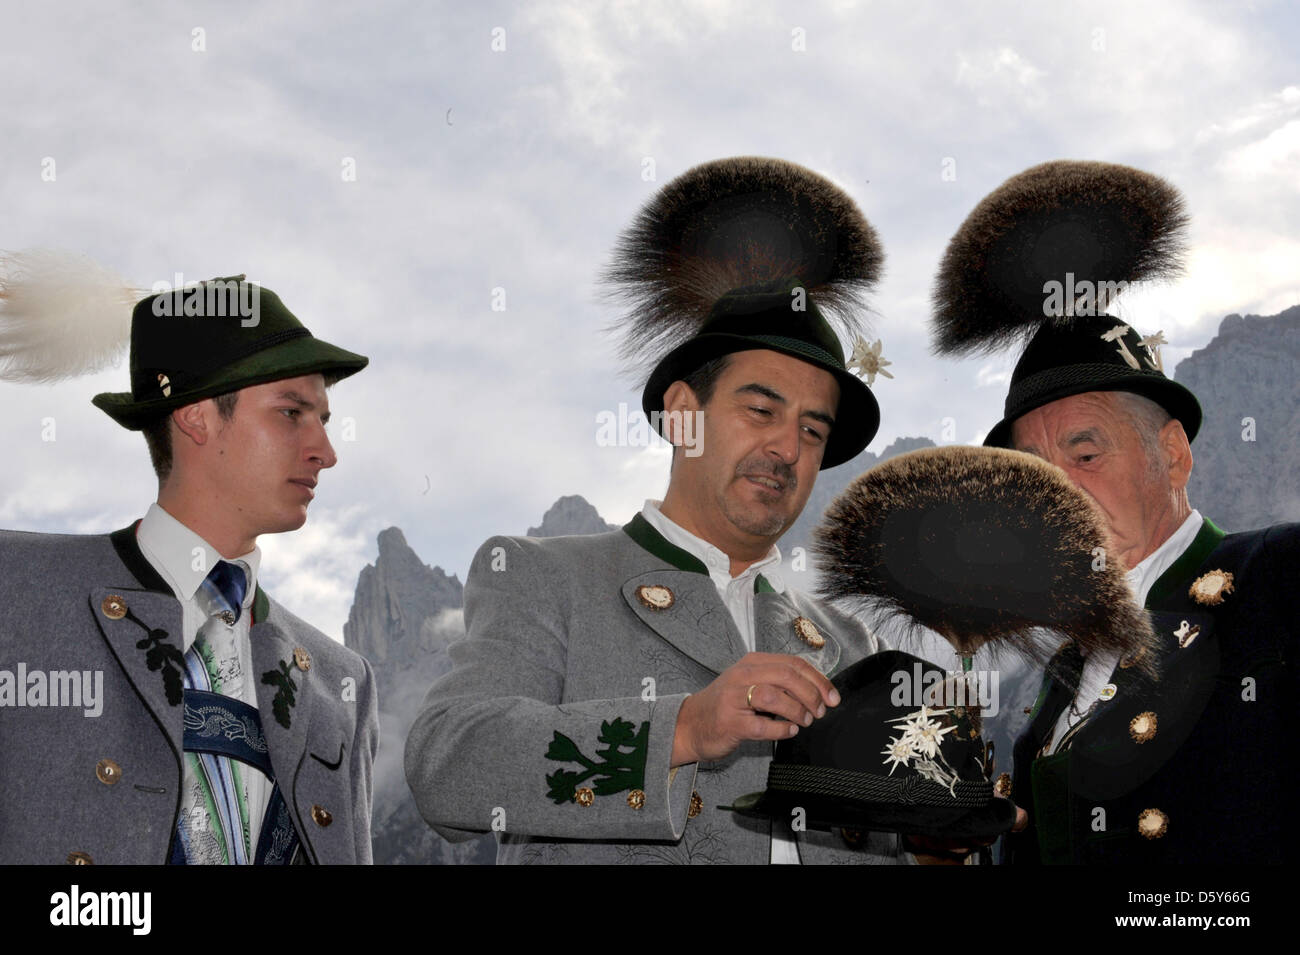 Participants of the 26th Gamsbart Olympics (lit. chamois beard olympics) wait for the award ceremony in Mittenwald, Germany, 14 October 2012. Up to 100 participants from different Apline areas competed at the event. Photo: Frank Leonhardt Stock Photo